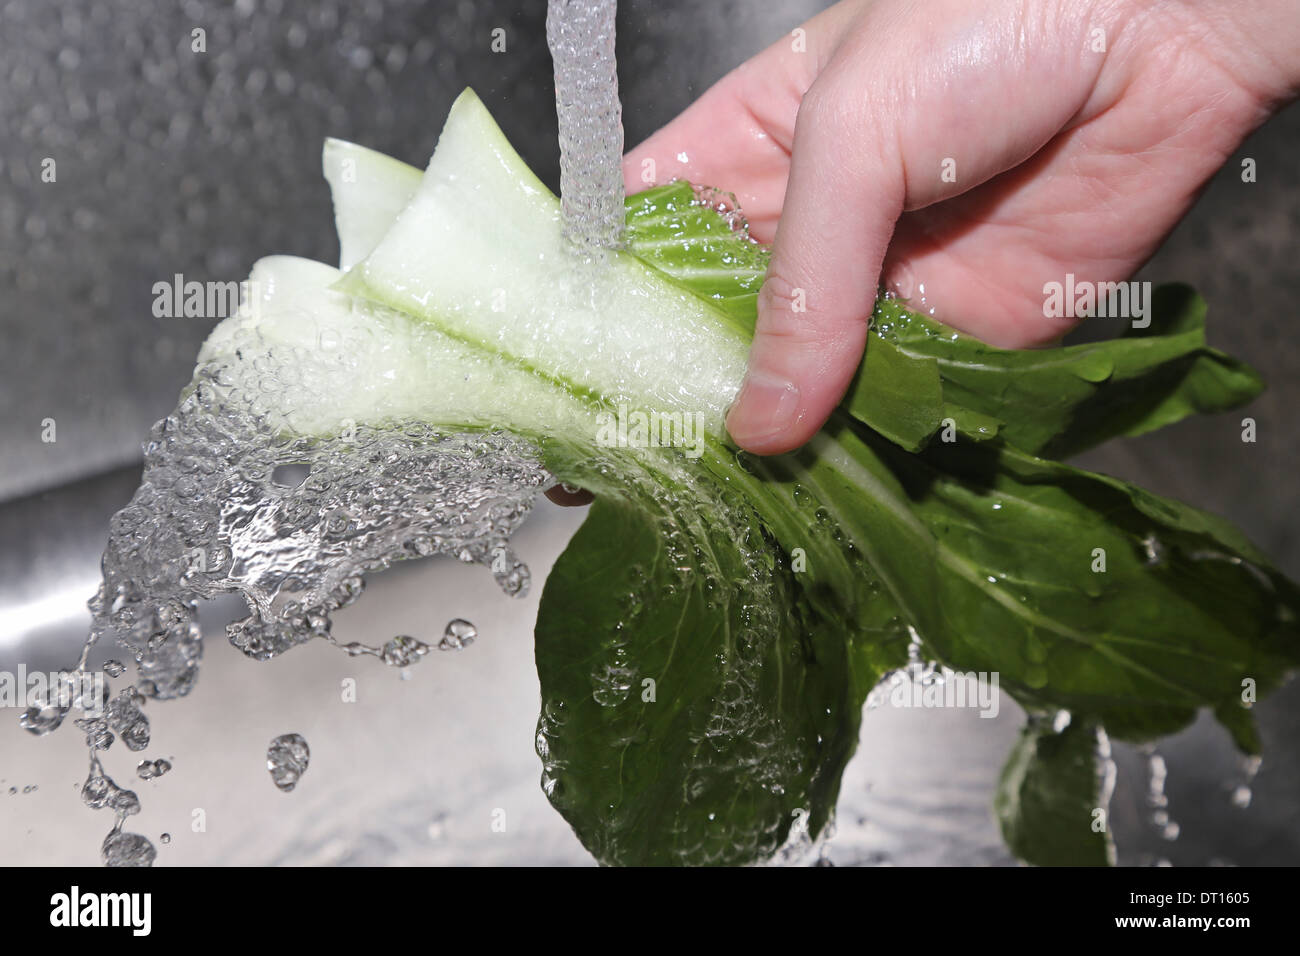 Washing fresh vegetables in the kitchen Stock Photo